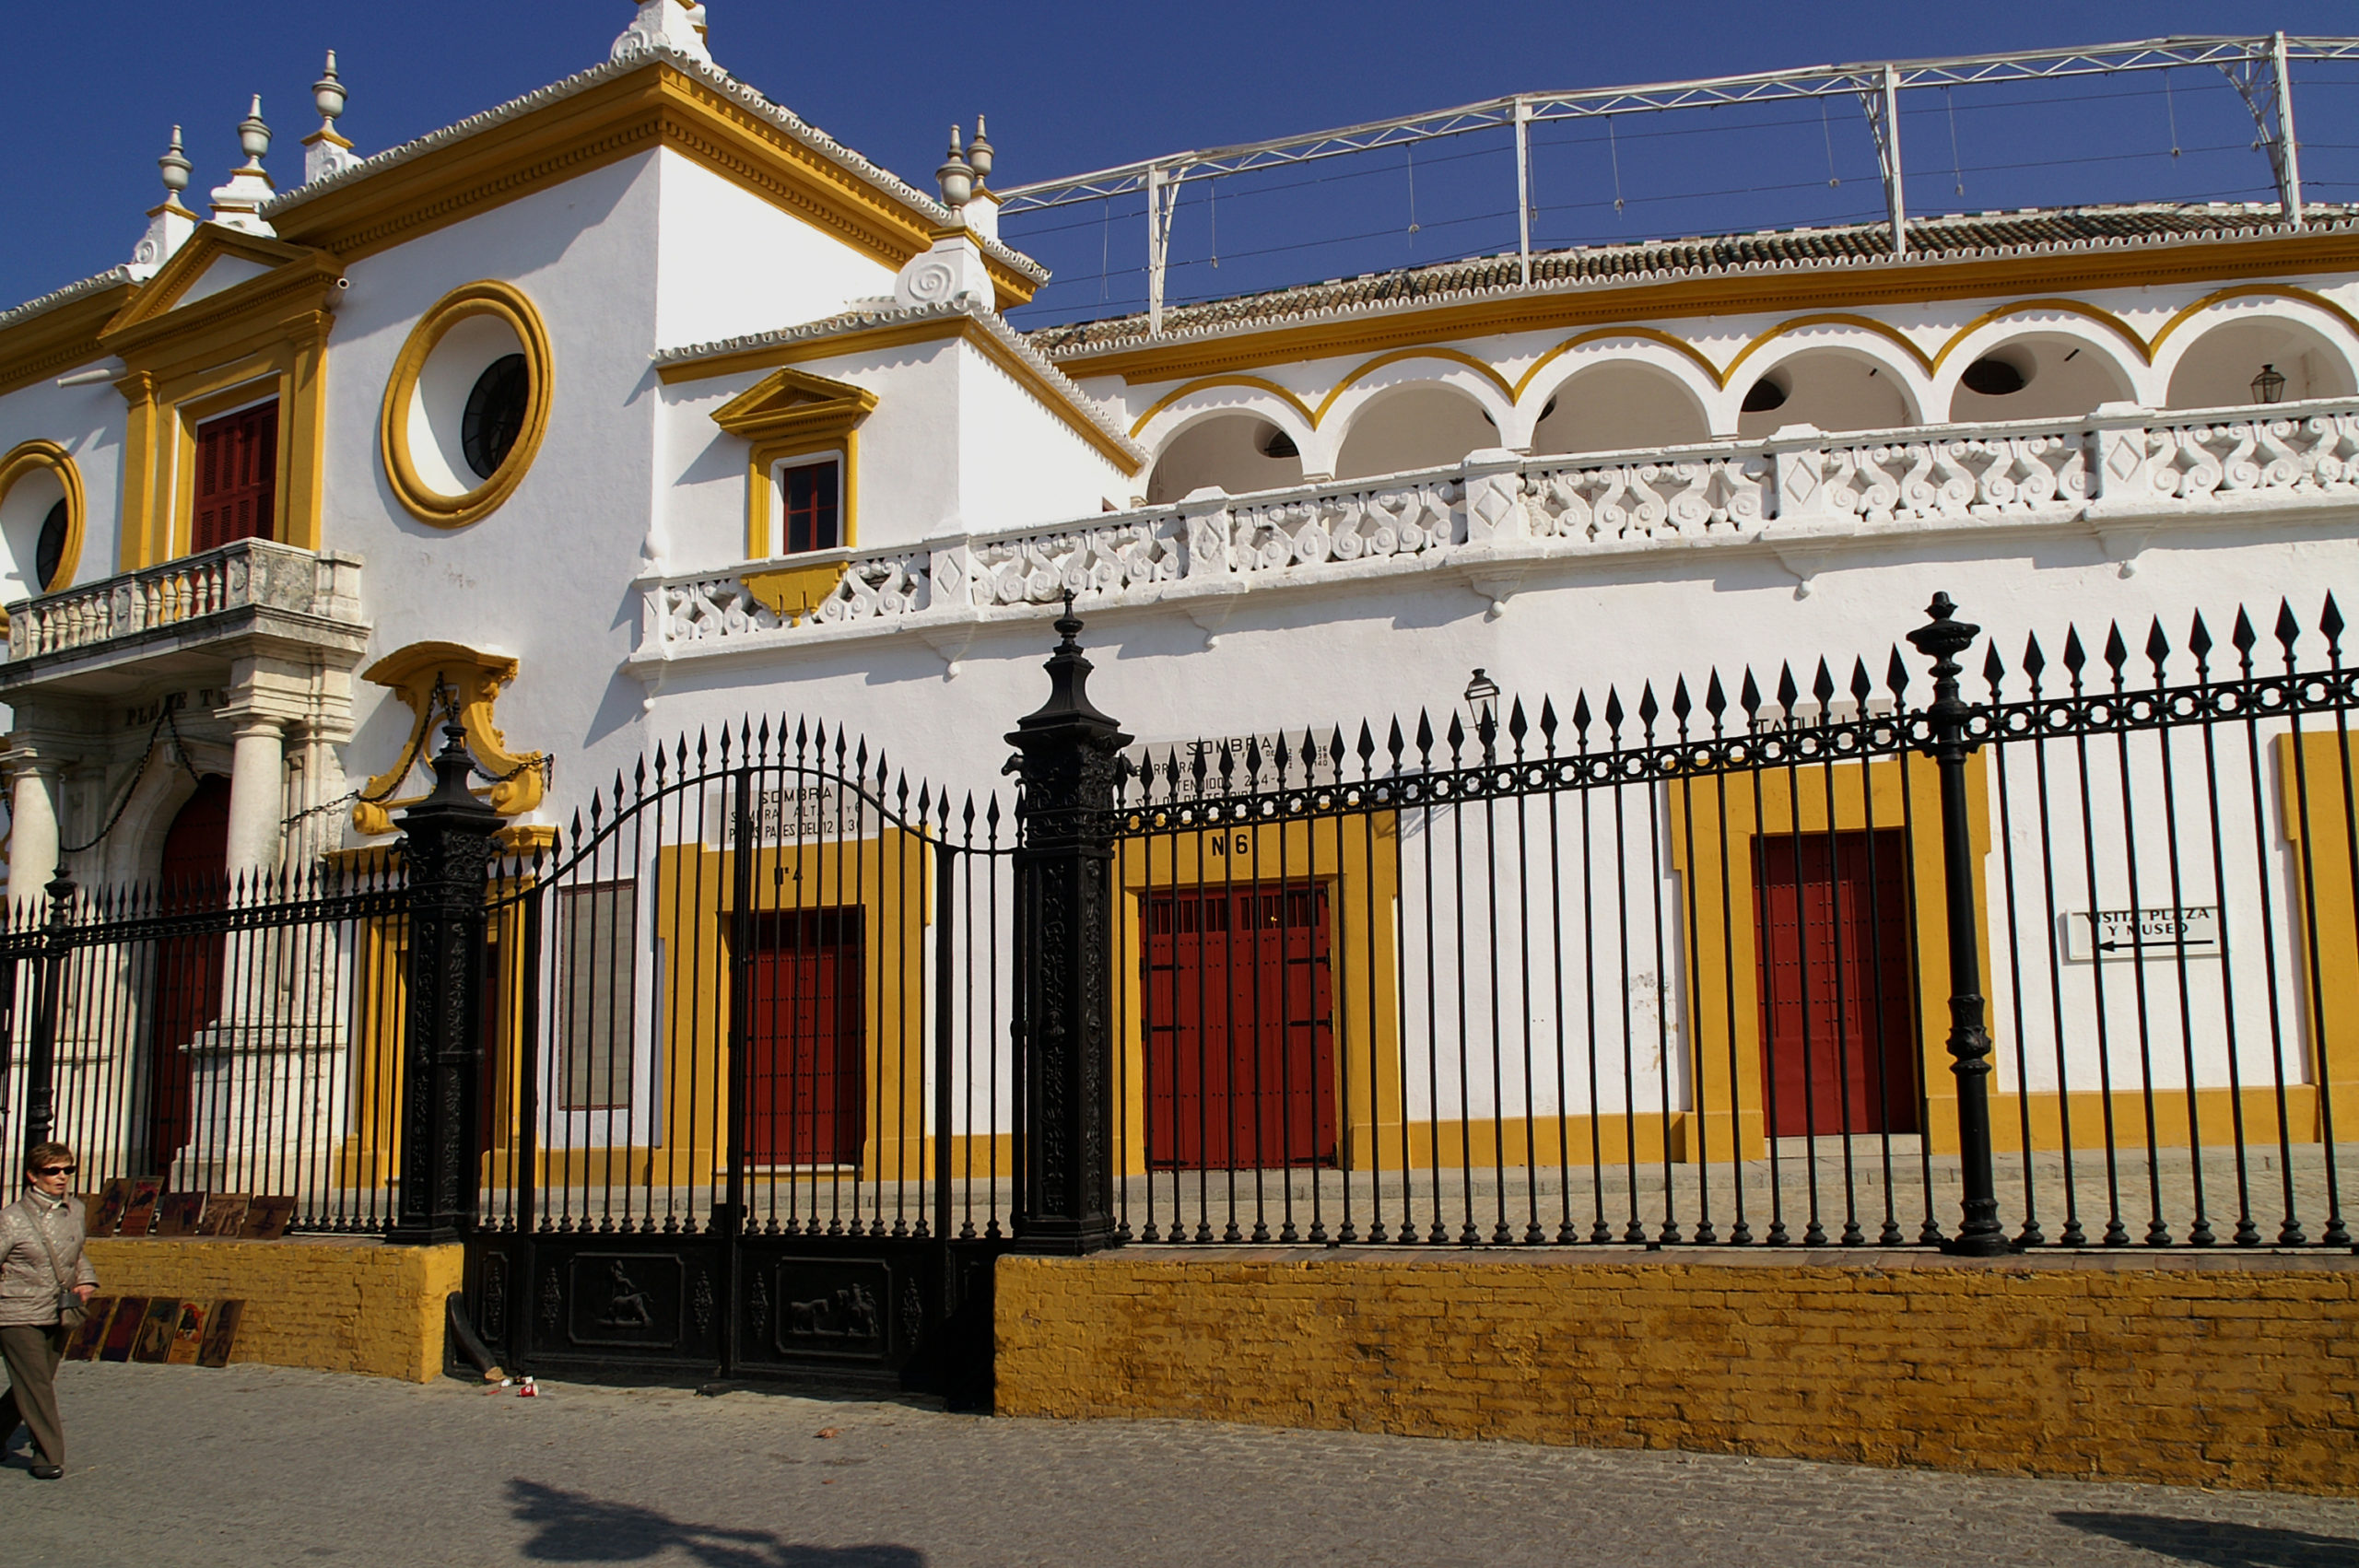 The building of Place in Seville- Plaza de Toros